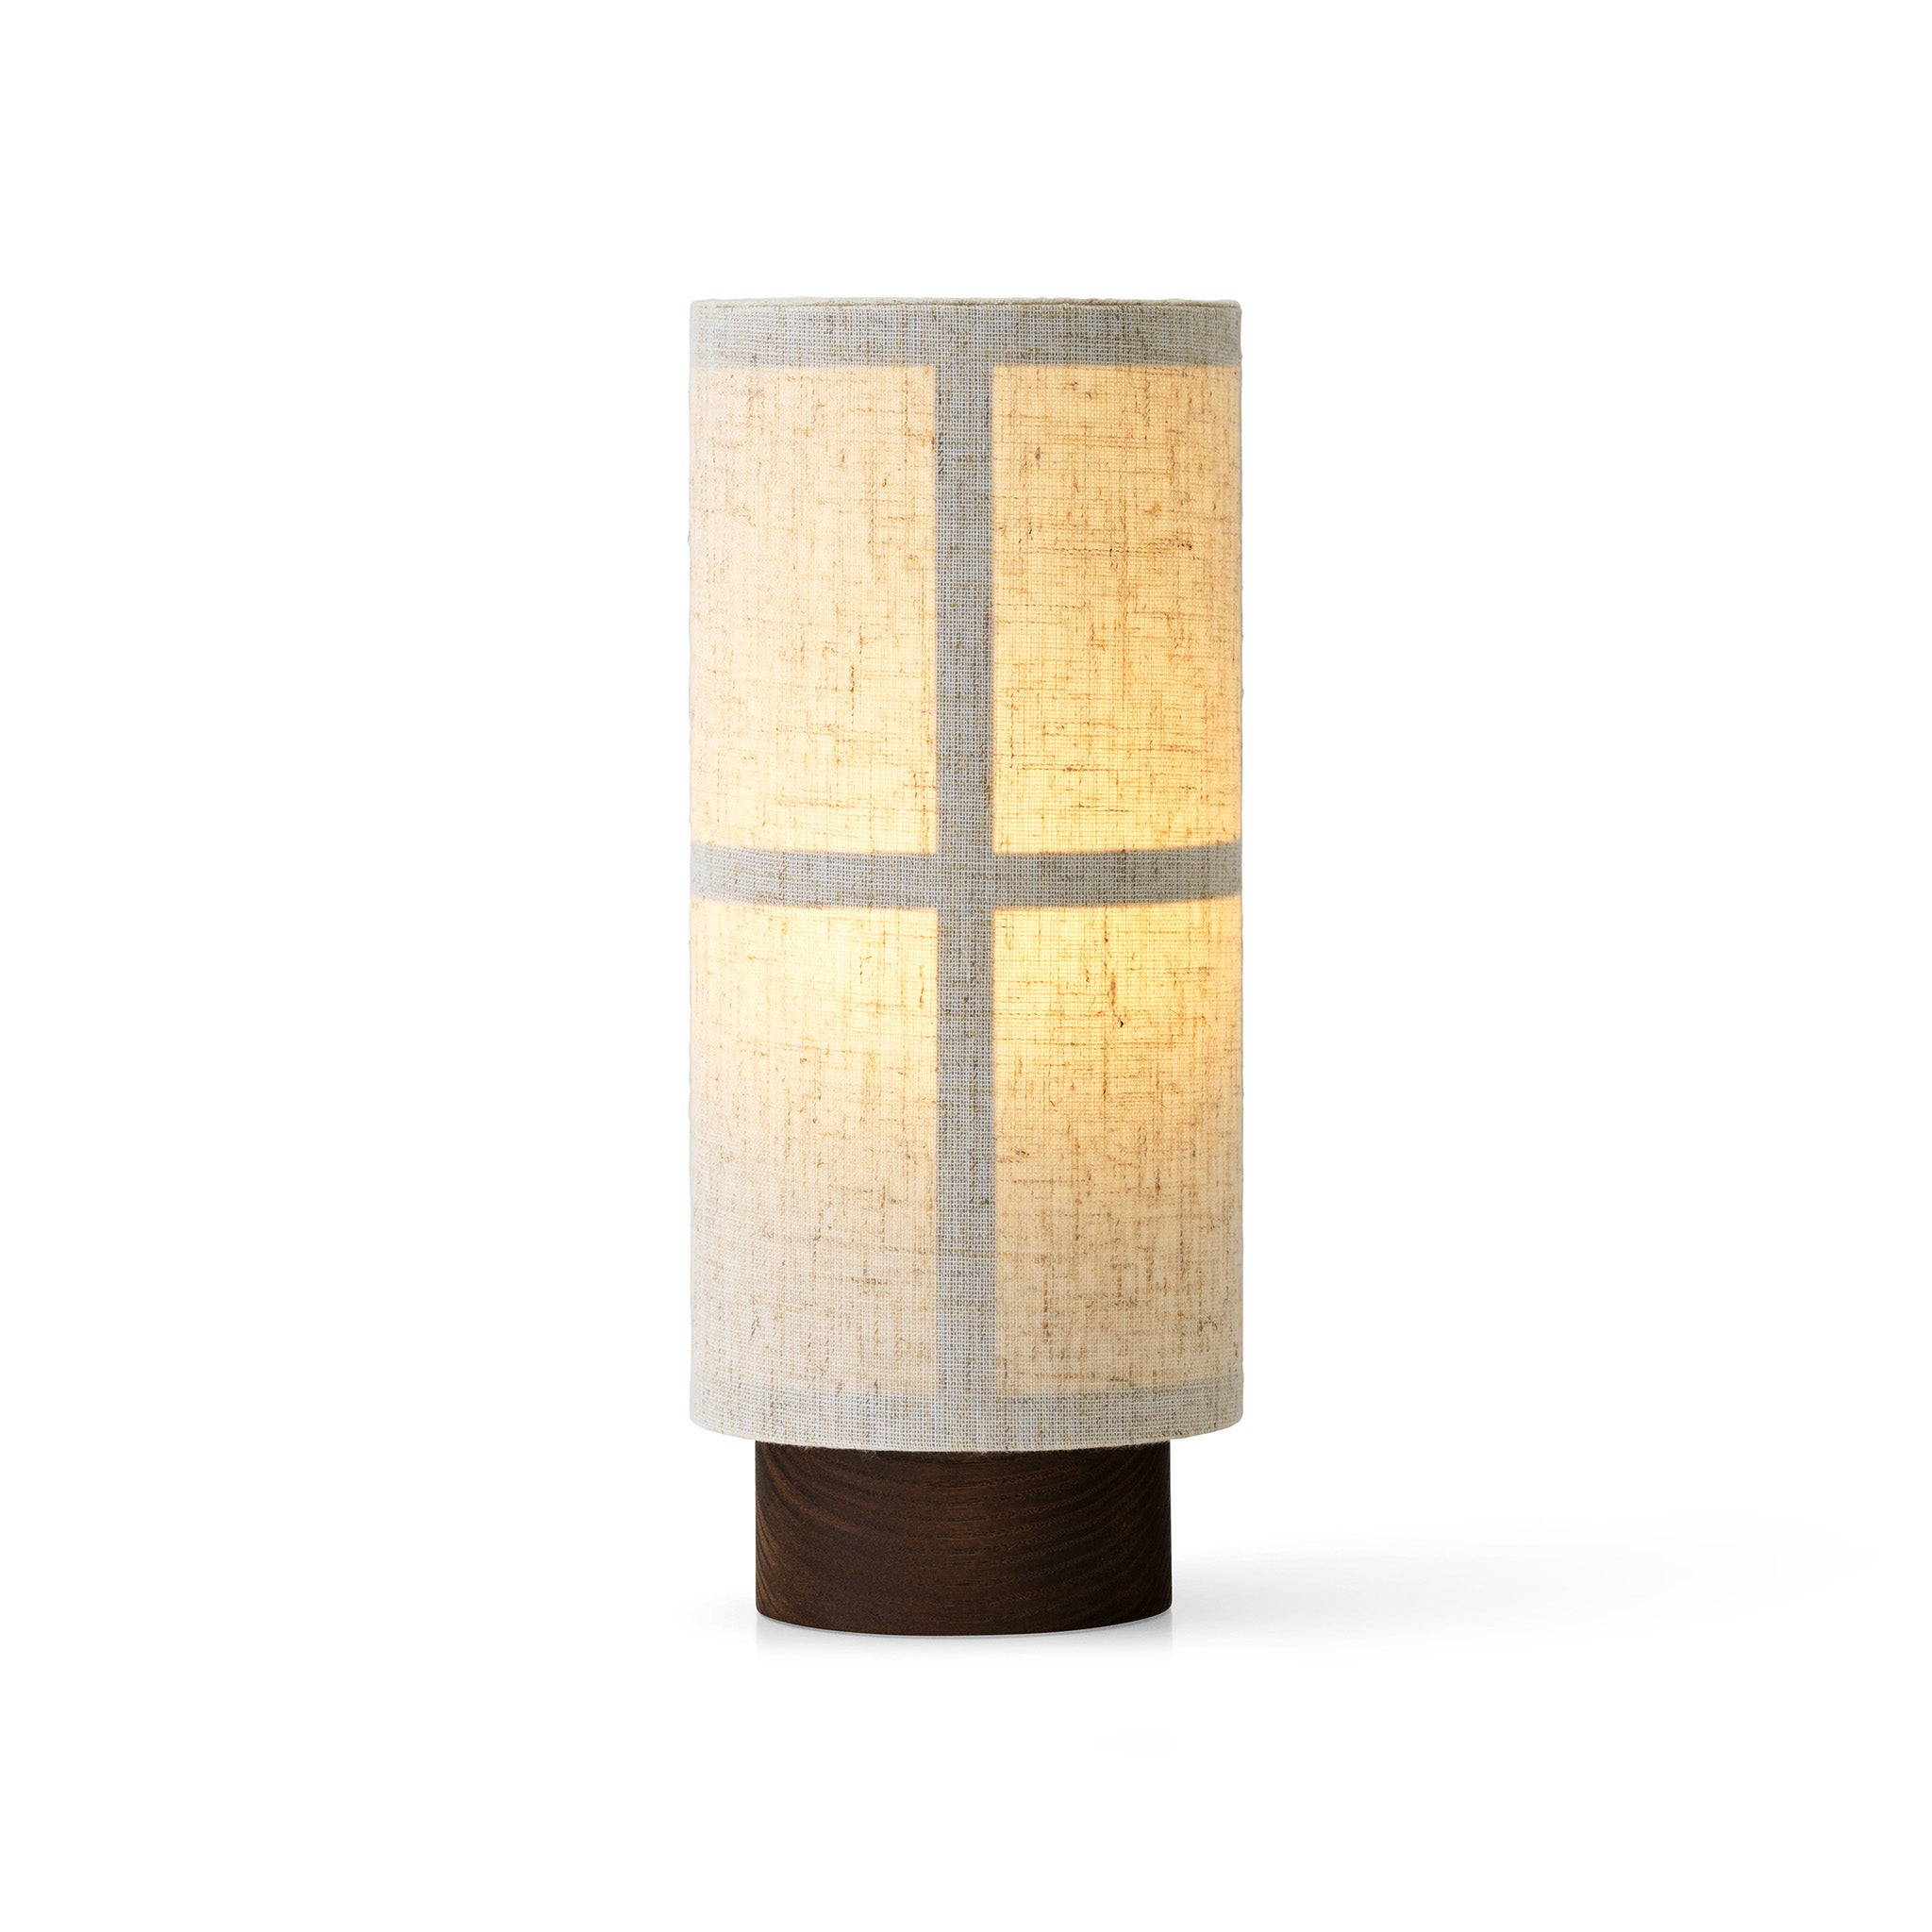 Hashira Portable Table Lamp by Norm Architects